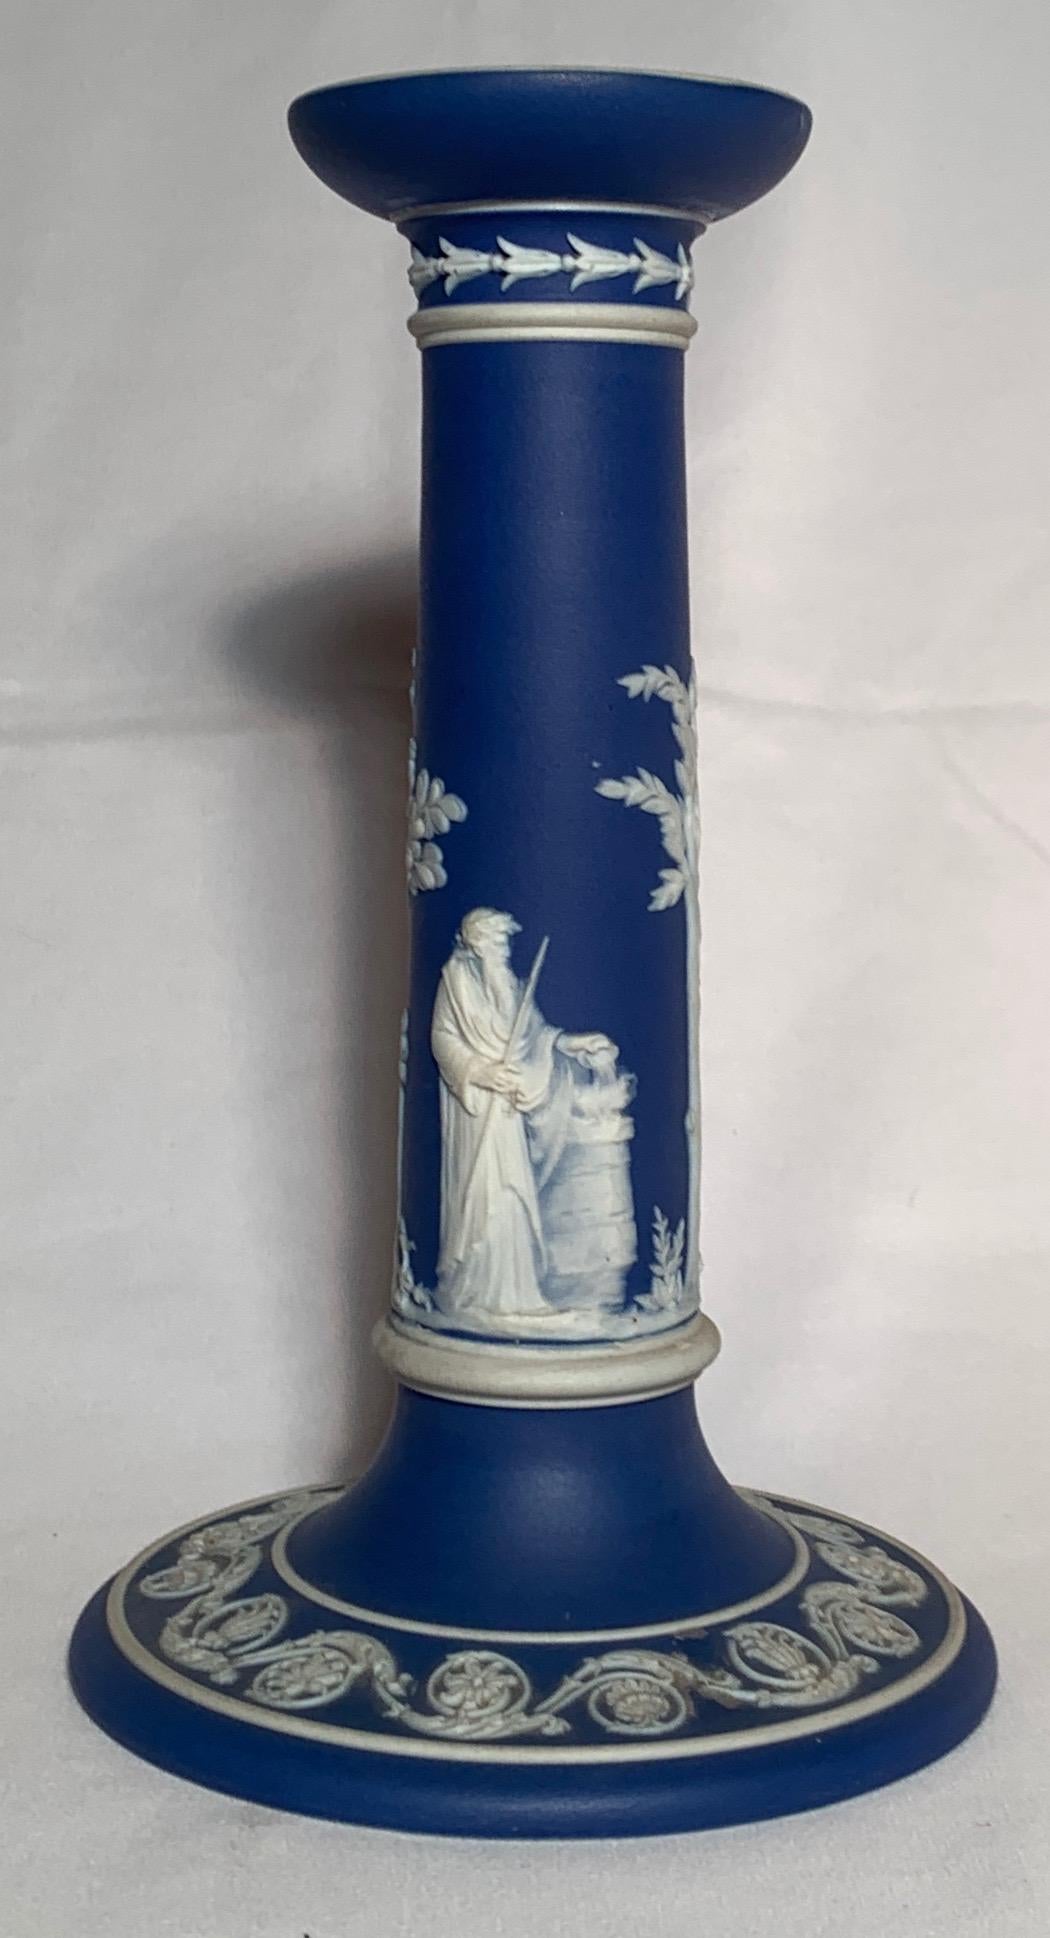 Pair of Antique English Wedgwood Candlesticks, circa 1900 In Good Condition For Sale In New Orleans, LA